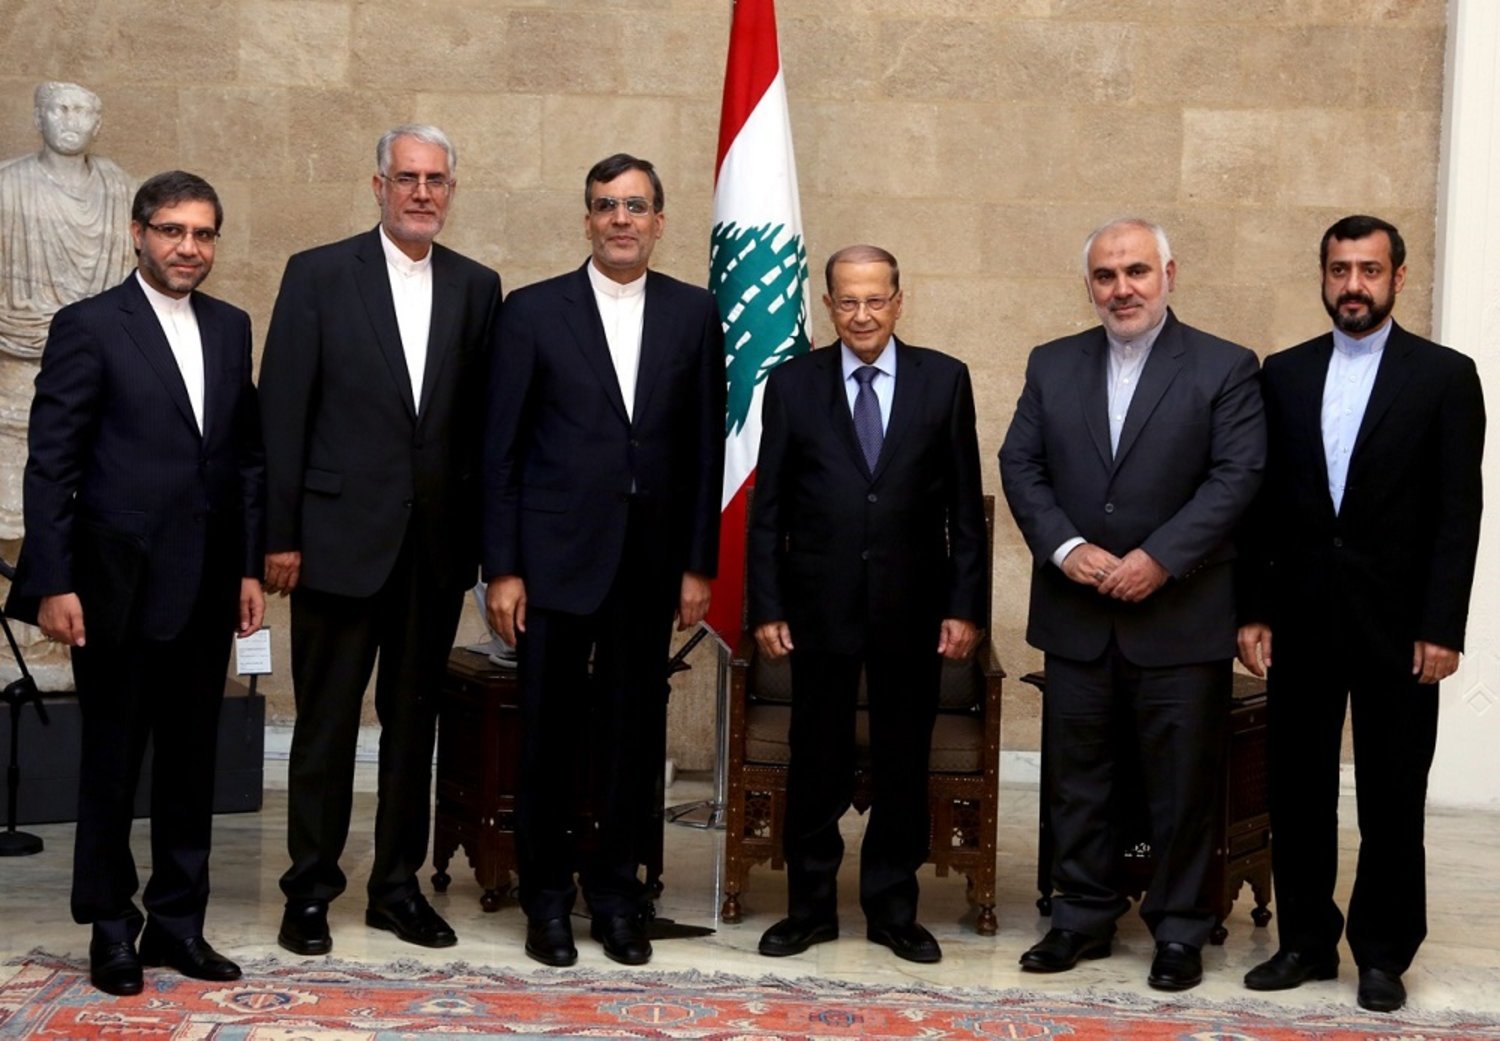 Lebanese President Michel Aoun meets with Iran’s assistant FM for Arab and African affairs Hussein Jaber Ansari and his accompanying delegation at the Baabda Palace. (Dalati & Nohra)